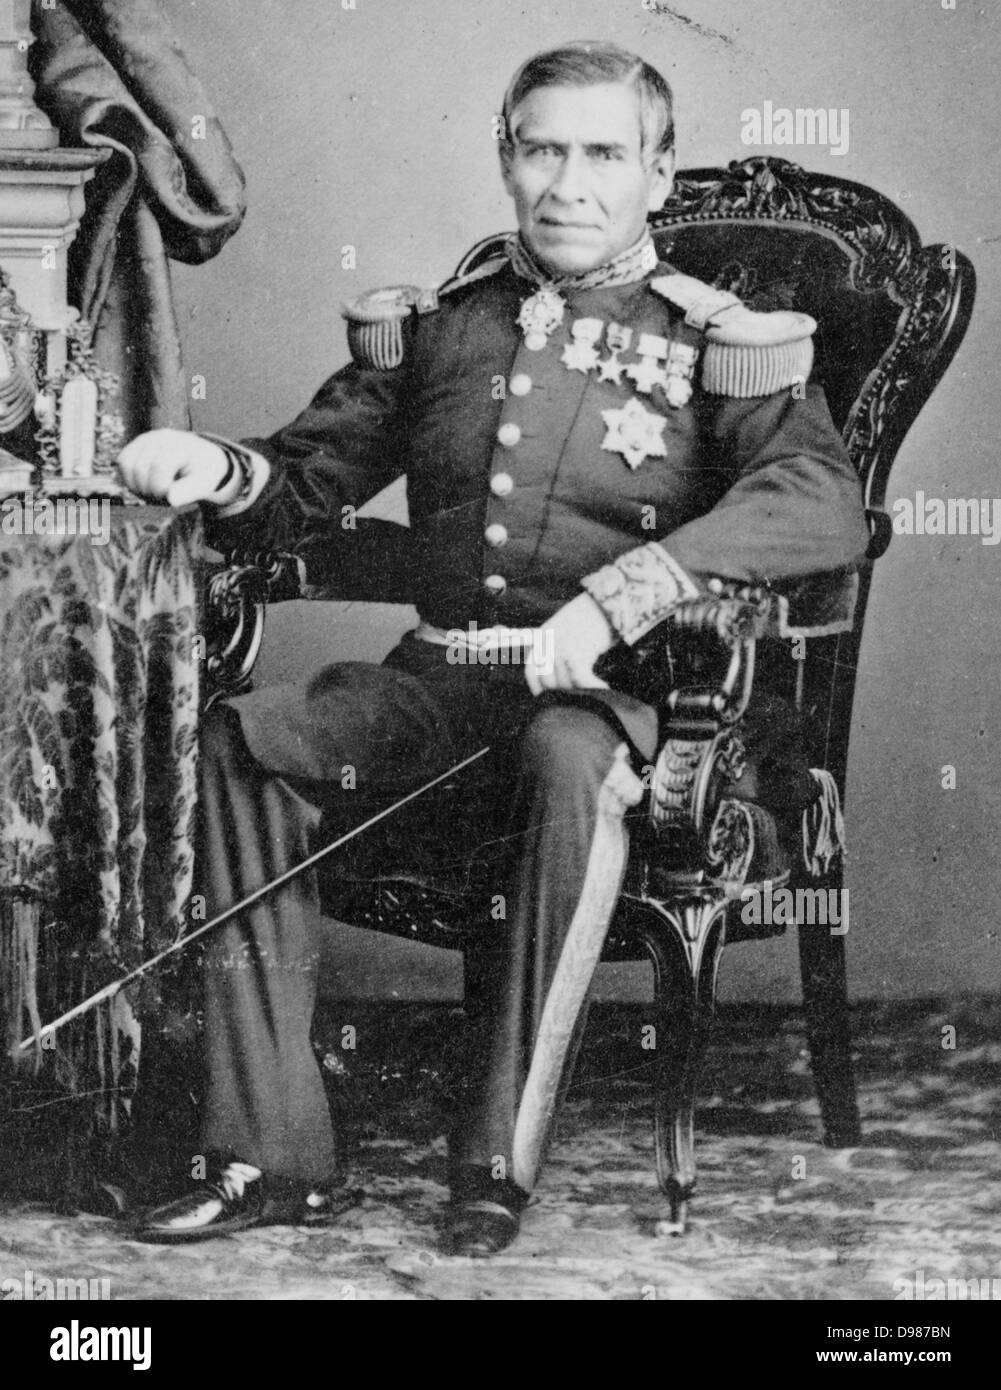 Juan Nepomuceno Almonte (May 15, 1803 – March 21, 1869) was a 19th century Mexican official, soldier and diplomat. He was a veteran of the Battle of the Alamo during the Texas Revolution. Almonte was also a leader of Mexico's Conservatives in the 1860s and served as regent Stock Photo